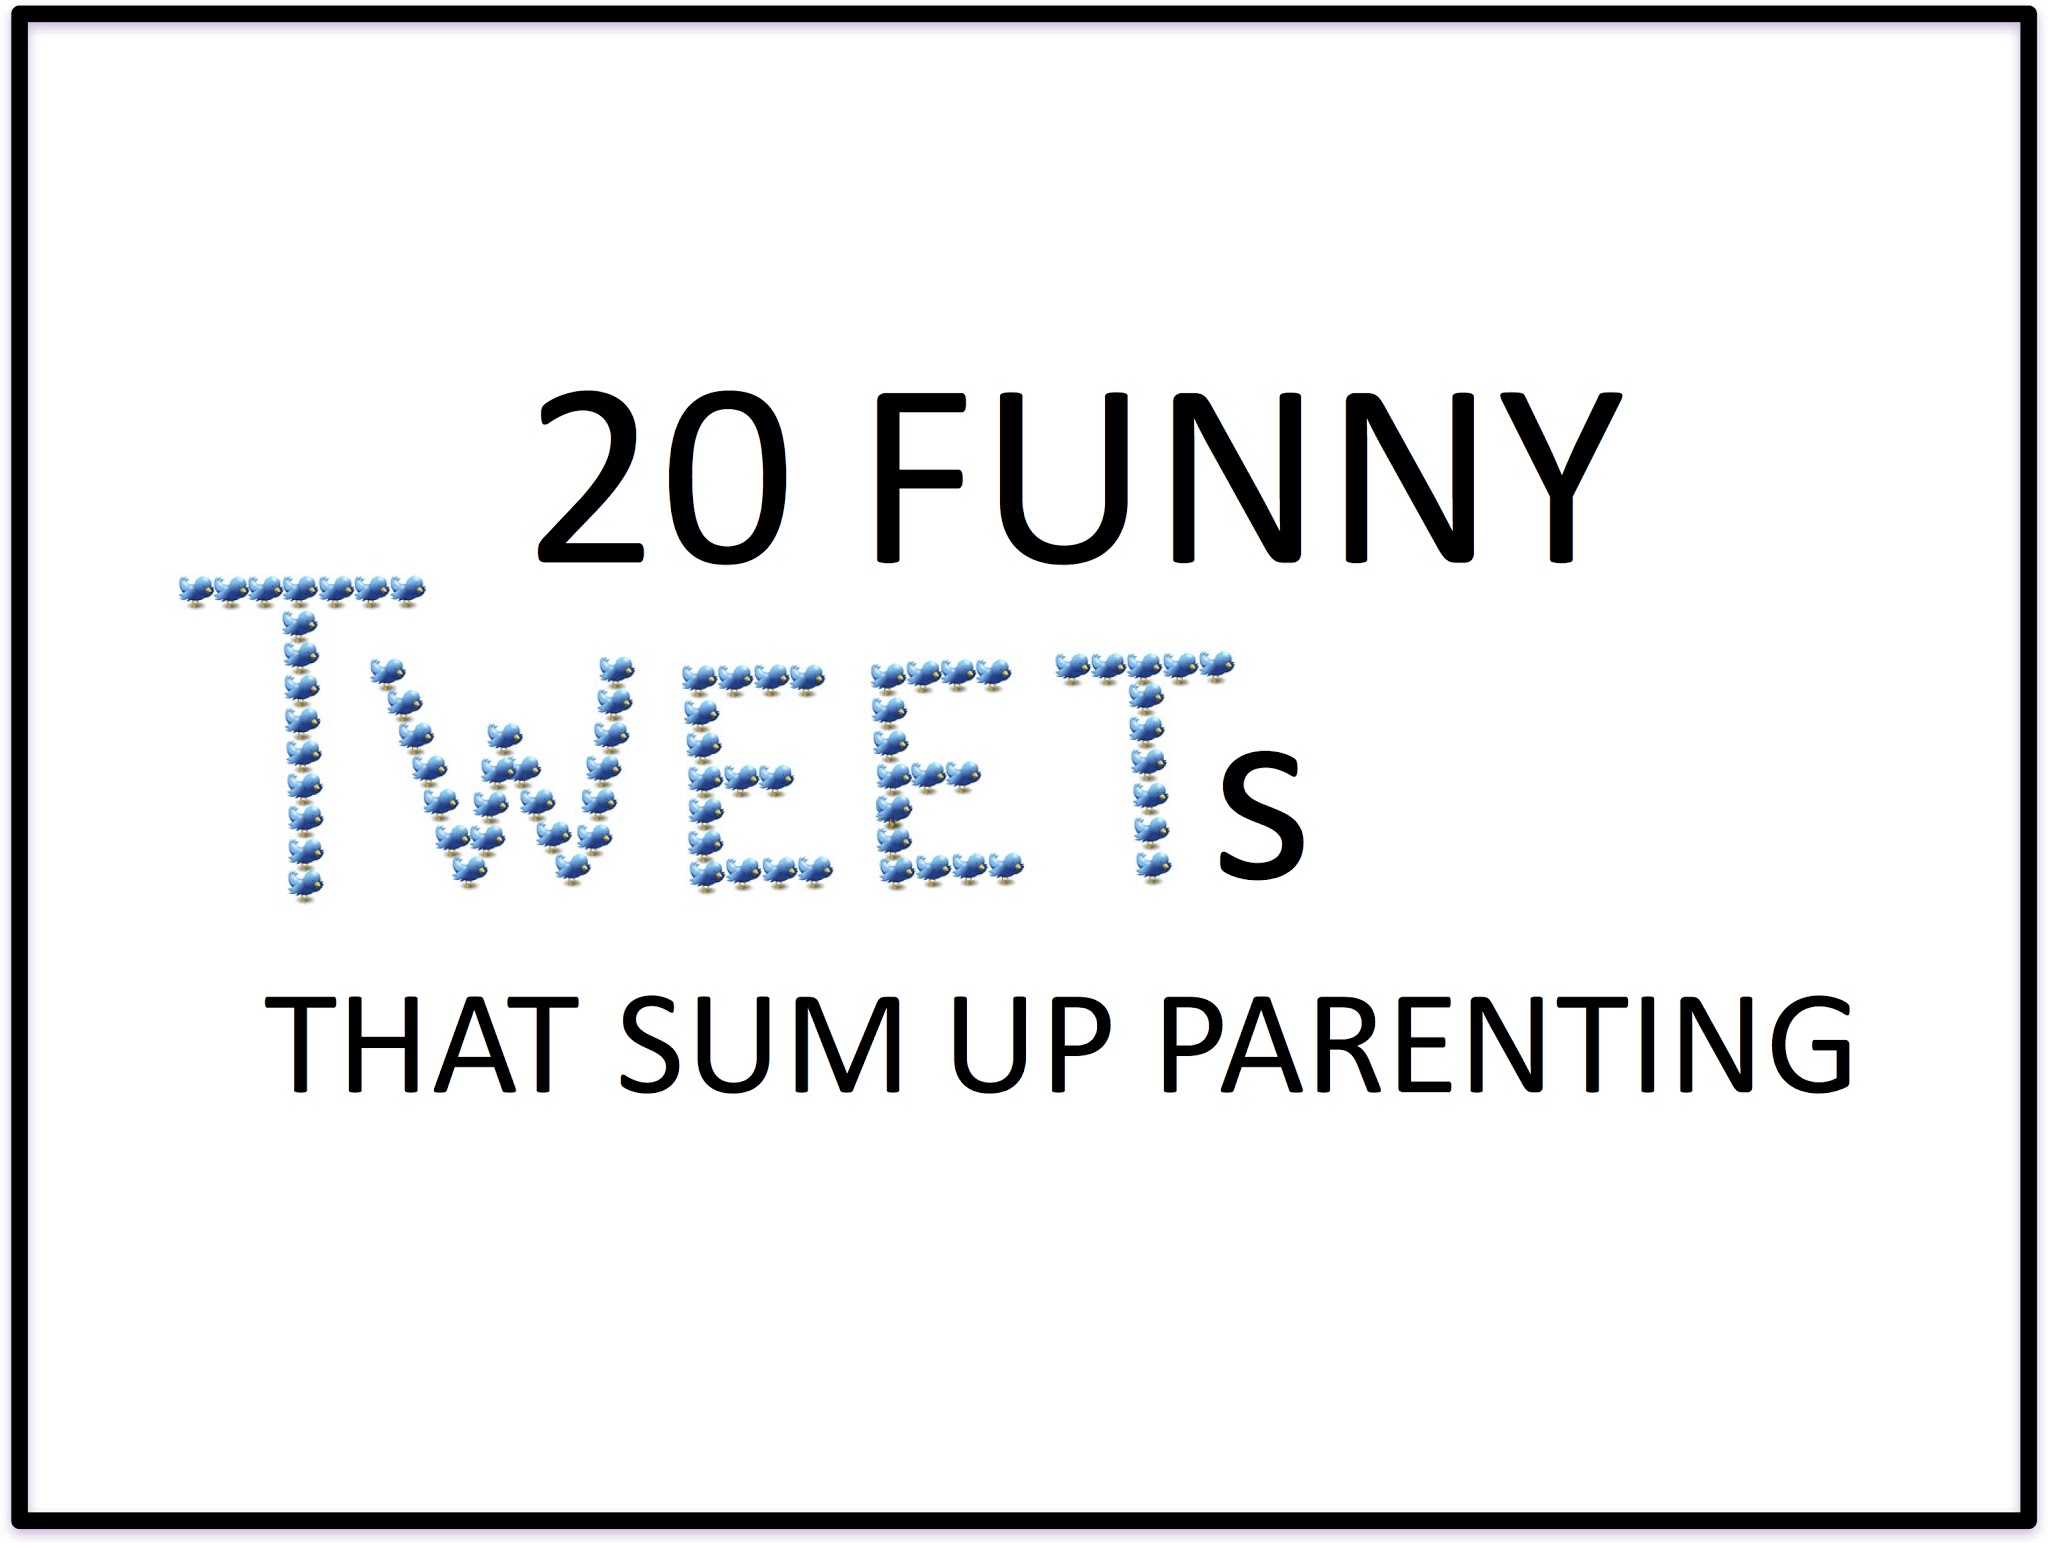 20 Funny Tweets That Sum Up Parenting ~ RELEVANT CHILDREN'S MINISTRY